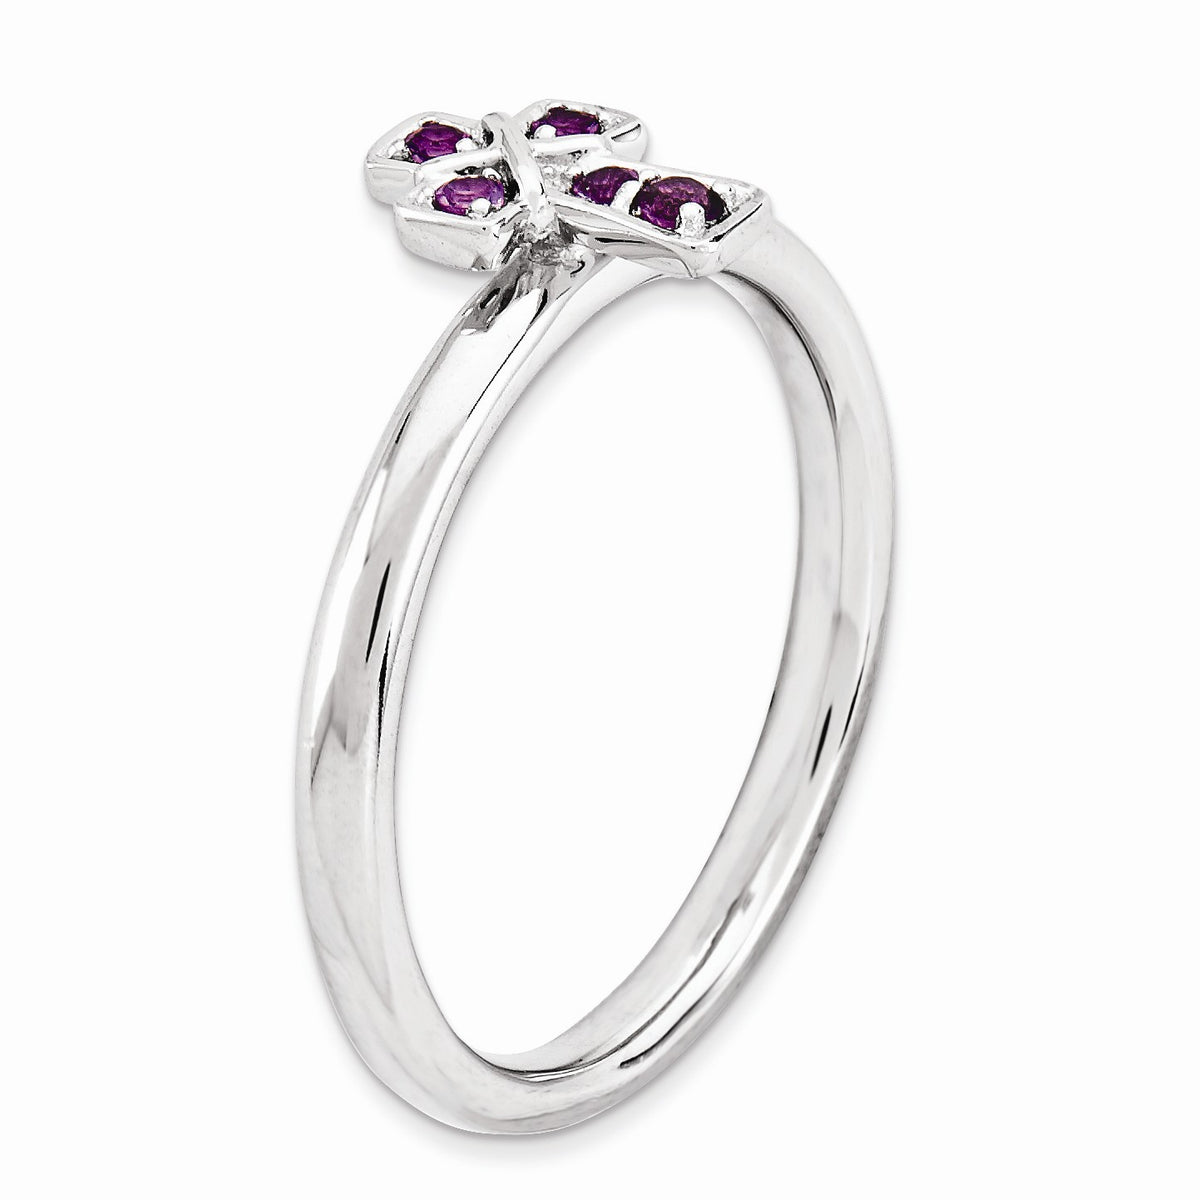 Alternate view of the Rhodium Plated Sterling Silver Stackable Amethyst 9mm Cross Ring by The Black Bow Jewelry Co.